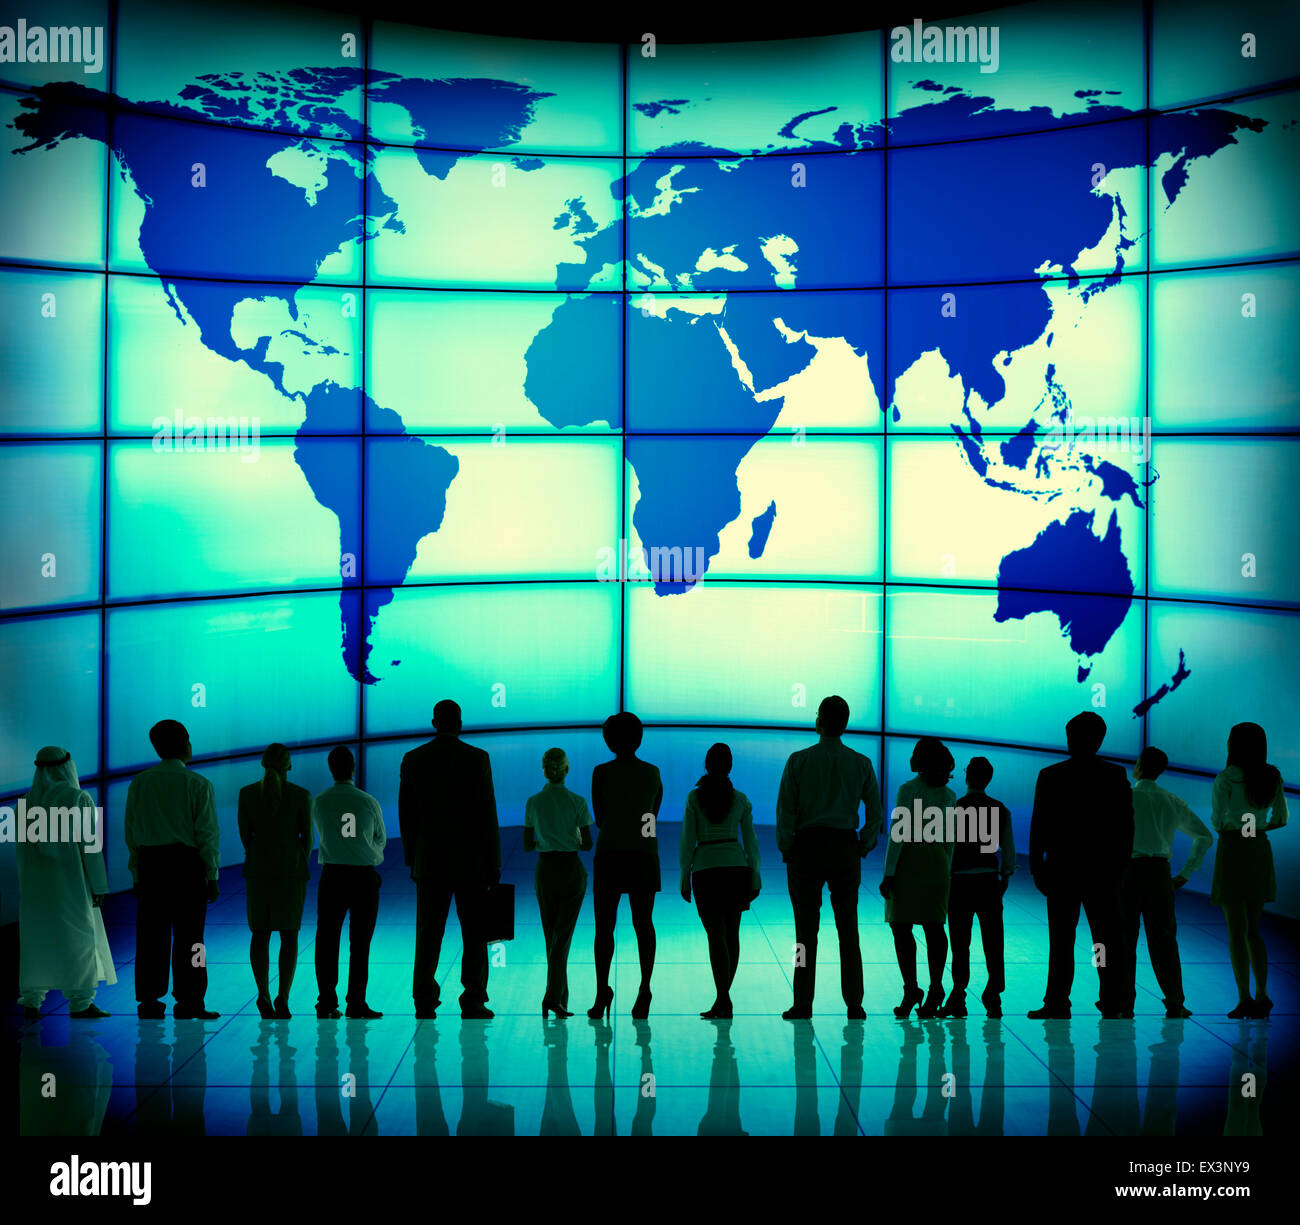 Global Business People Corporate World Map Concept Stock Photo